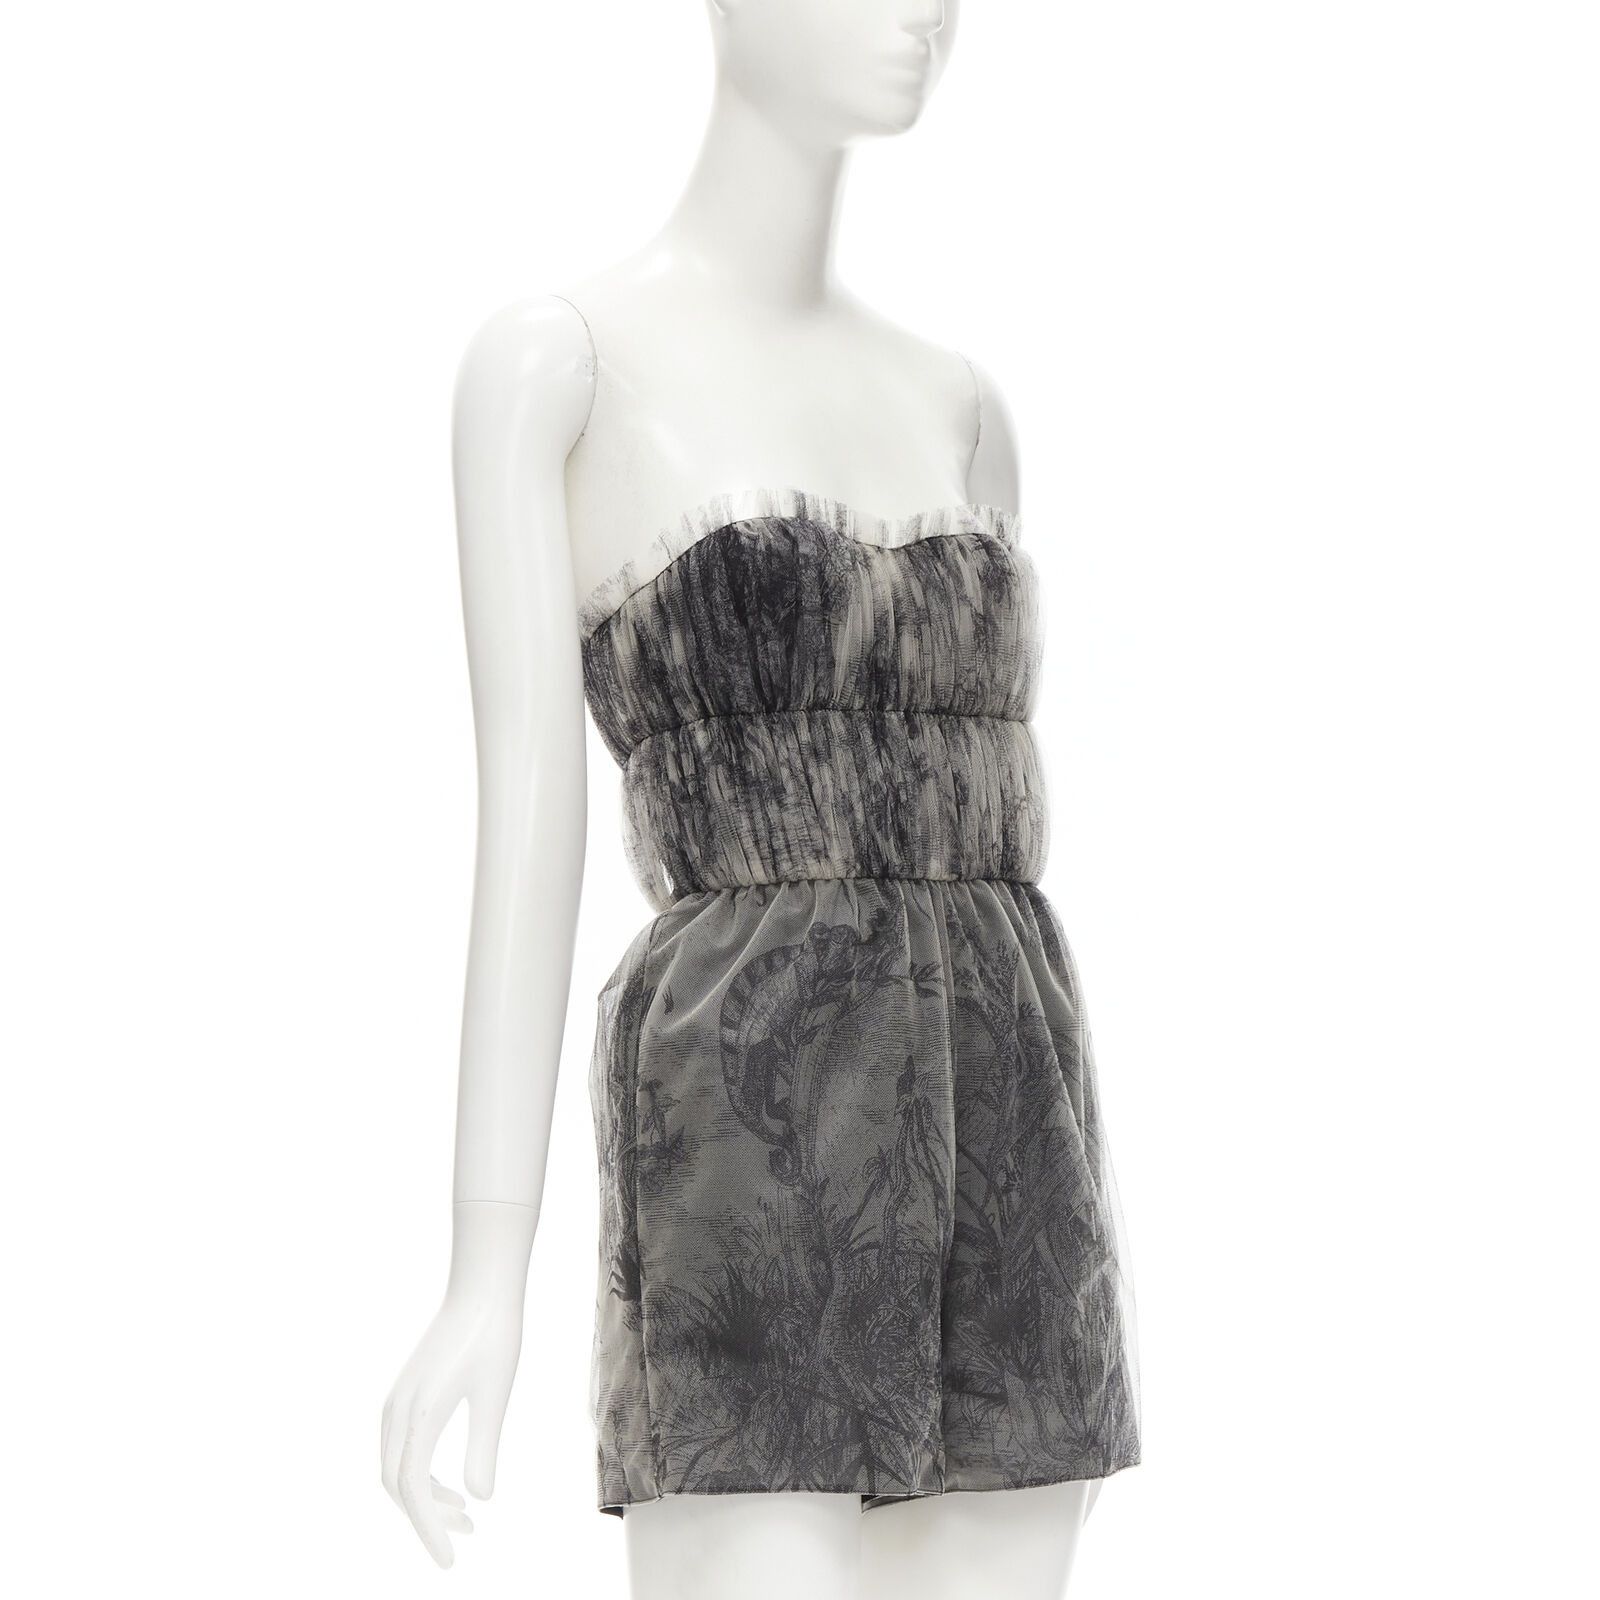 Dior new CHRISTIAN DIOR Fantaisie Dioriviera tulle gathered pleated romper FR34 XS Size 26" / US 2 / IT 38 - 3 Thumbnail